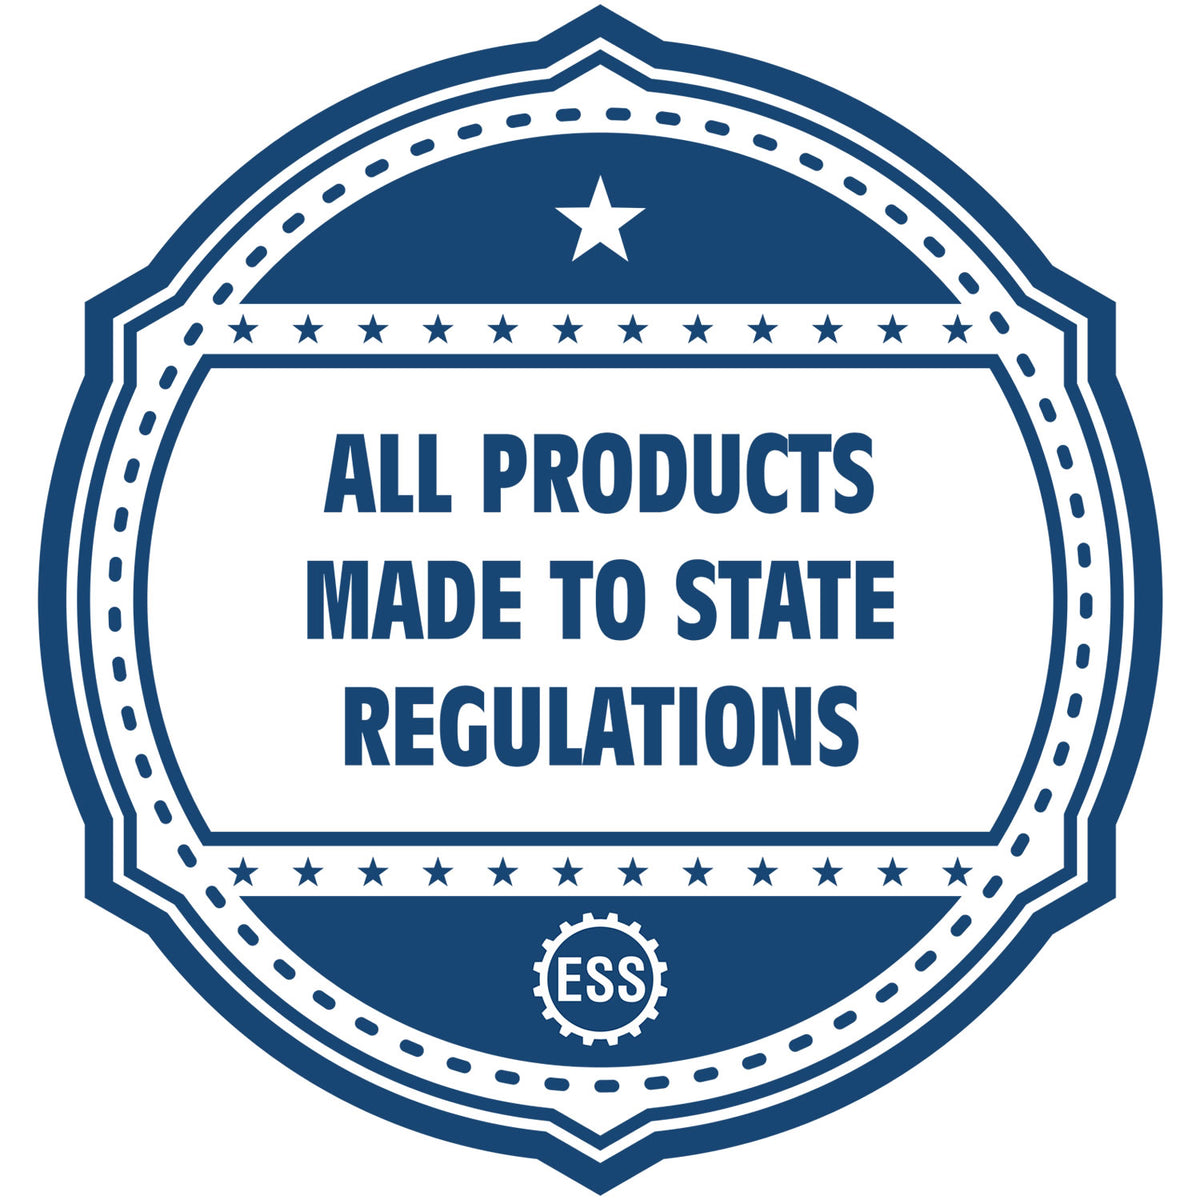 An icon or badge element for the Slim Pre-Inked Nevada Architect Seal Stamp showing that this product is made in compliance with state regulations.